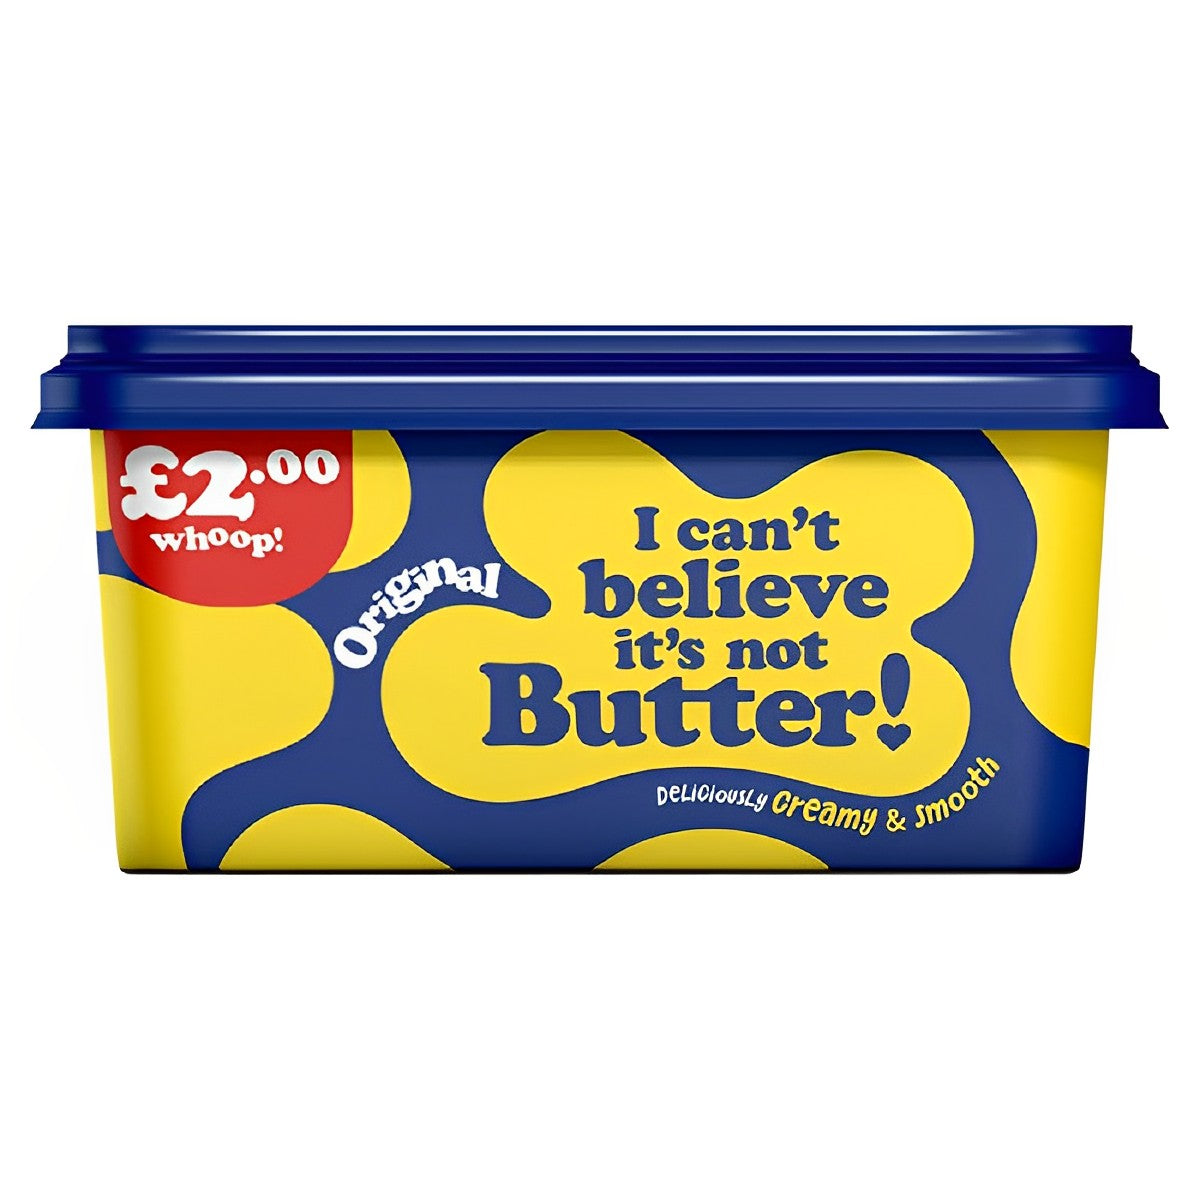 I Can't Believe It's Not Butter! - Original - 450g - Continental Food Store